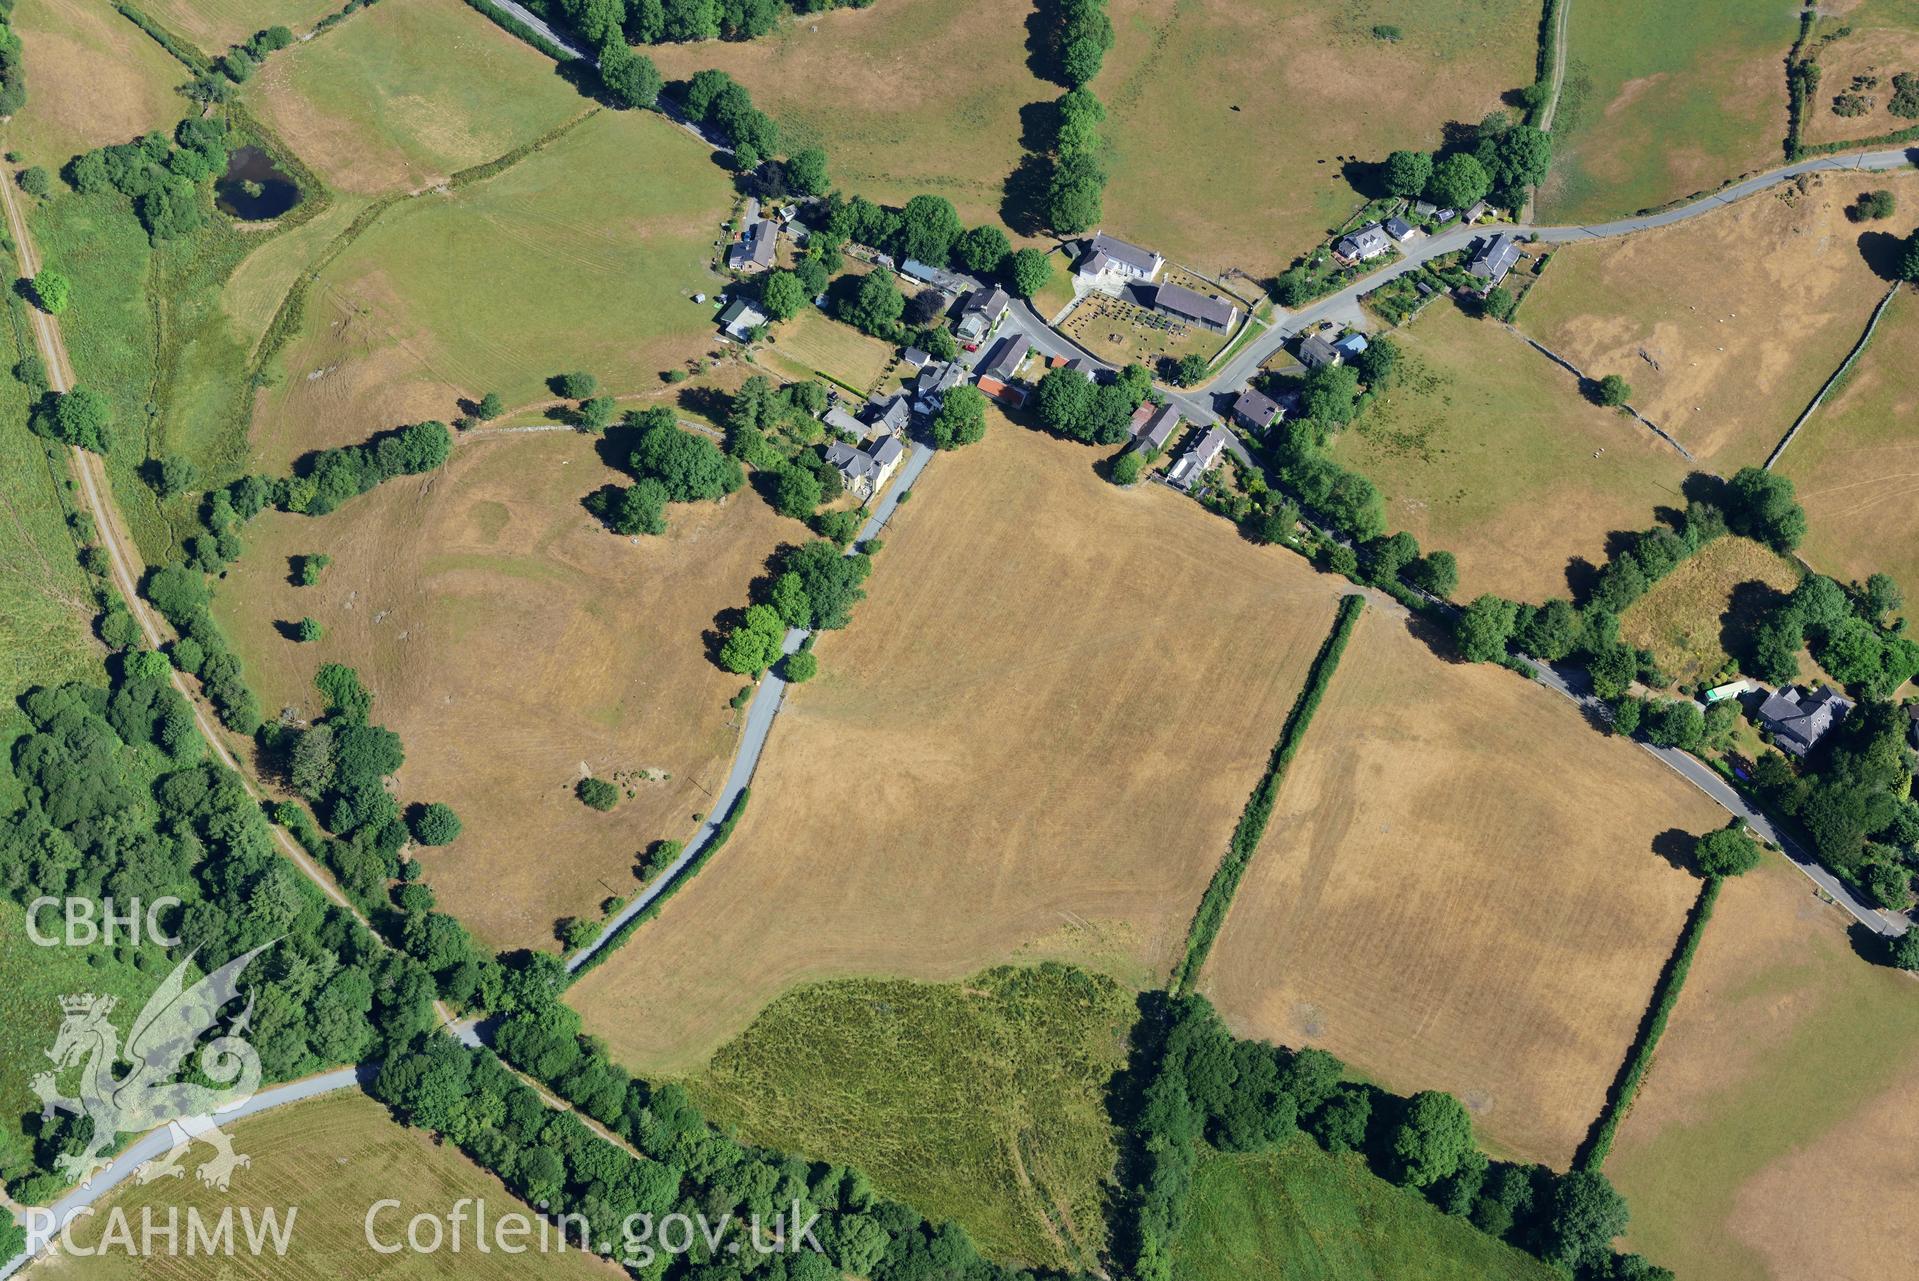 Royal Commission aerial photography of Ystradmeurig village taken on 19th July 2018 during the 2018 drought.